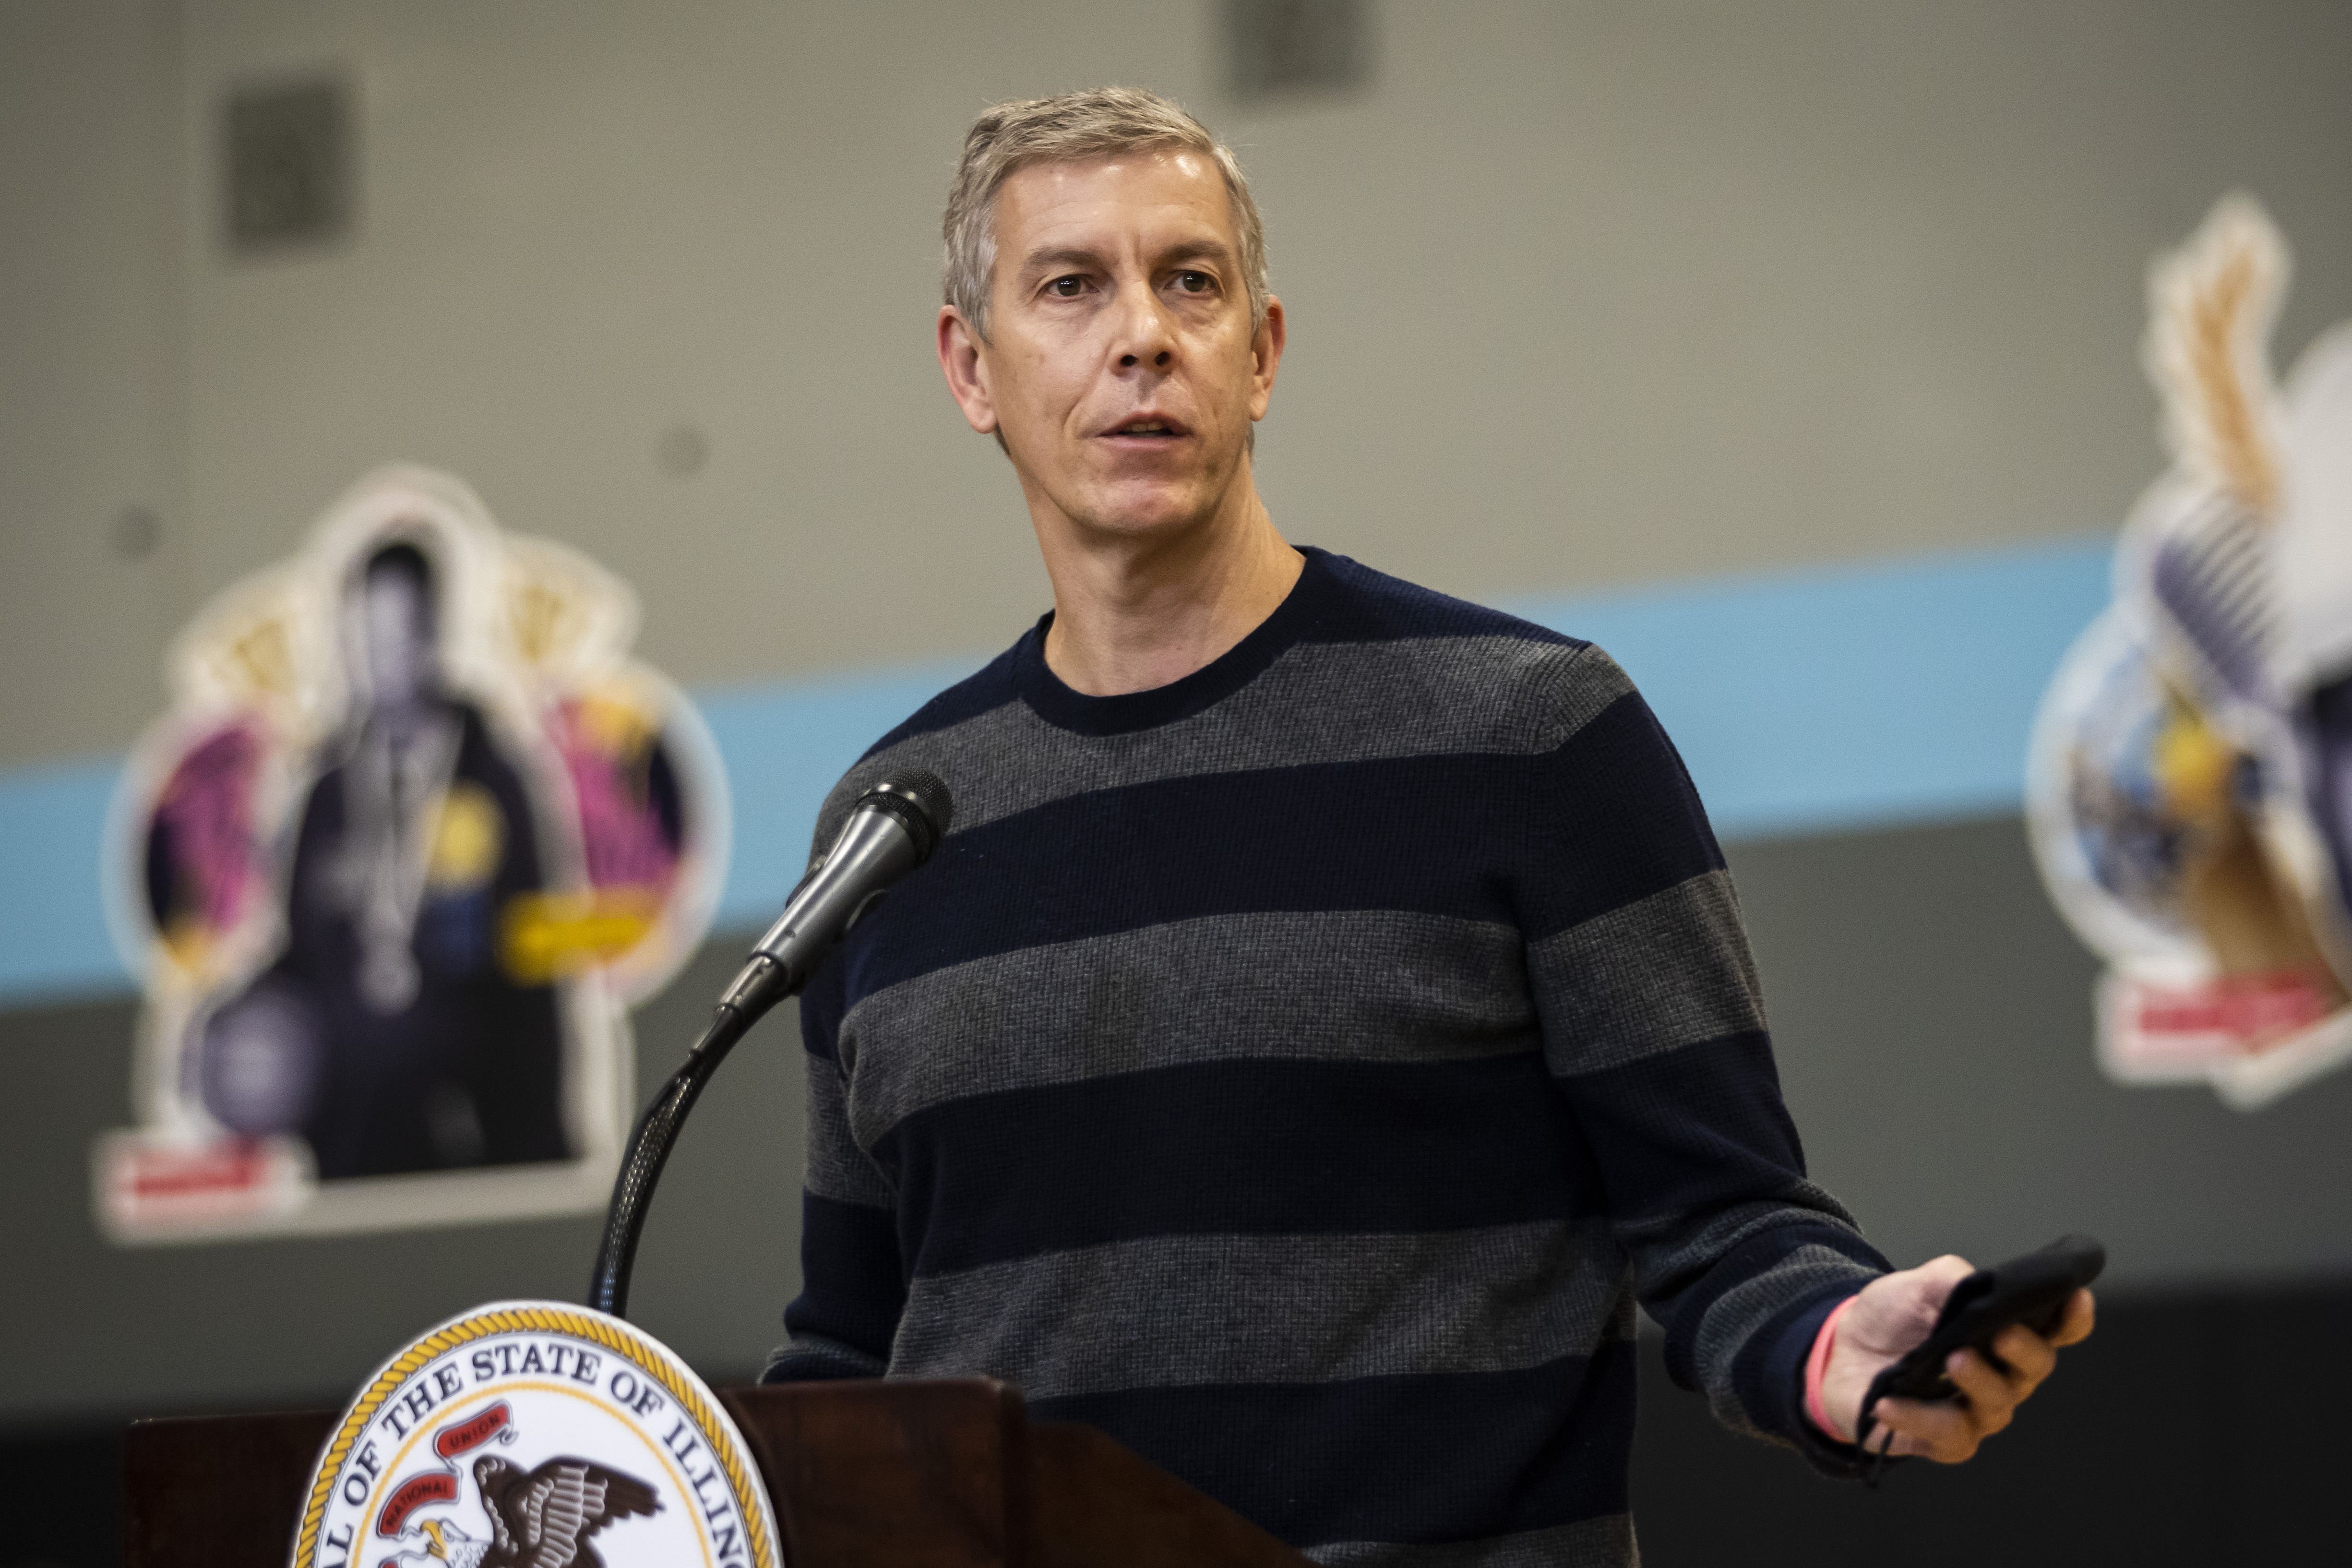 Arne Duncan, a former U.S. Secretary of Education and co-founder of the anti-gun violence organization Chicago CRED, speaks during a news conference at Breakthrough FamilyPlex on the West Side before Gov. J.B. Pritzker signs an executive order declaring gun violence a public health crisis in the state, Monday, Nov, 1, 2021.